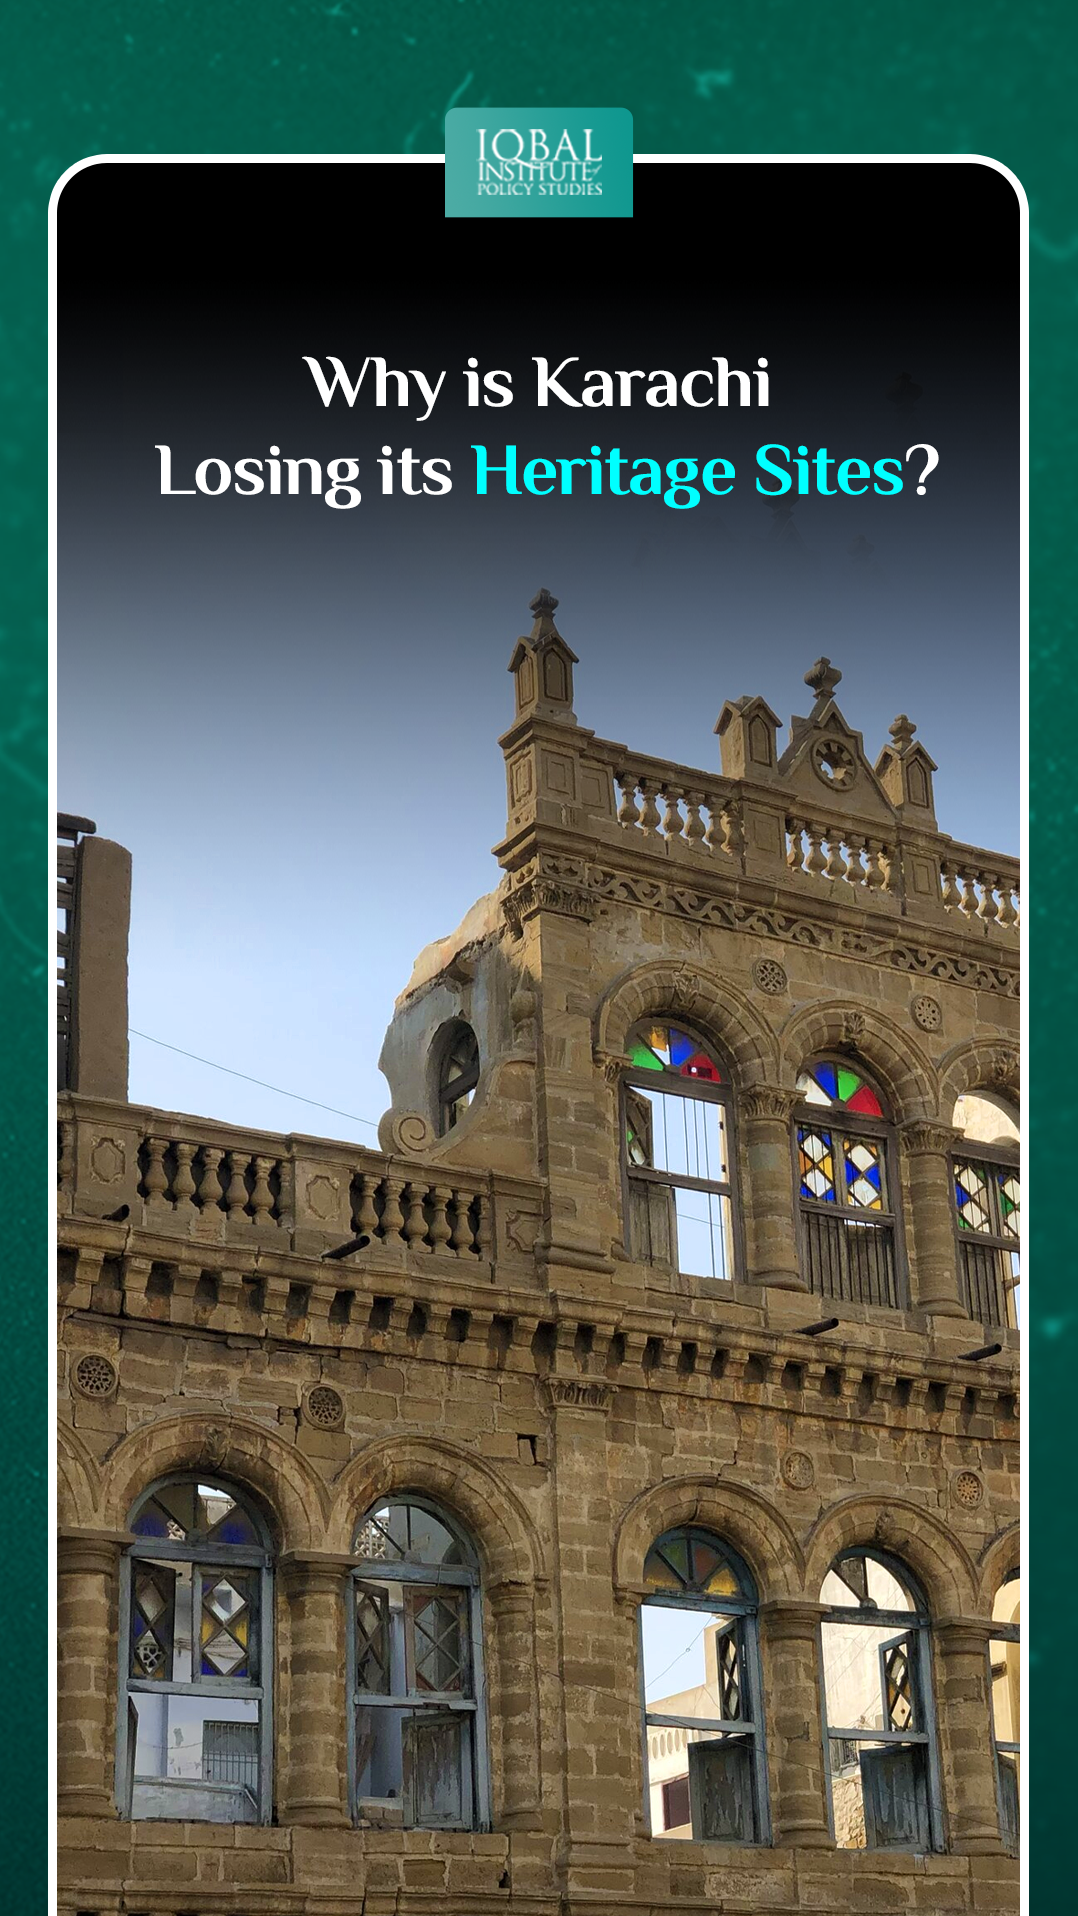 Why is Karachi Losing its Heritage Sites?